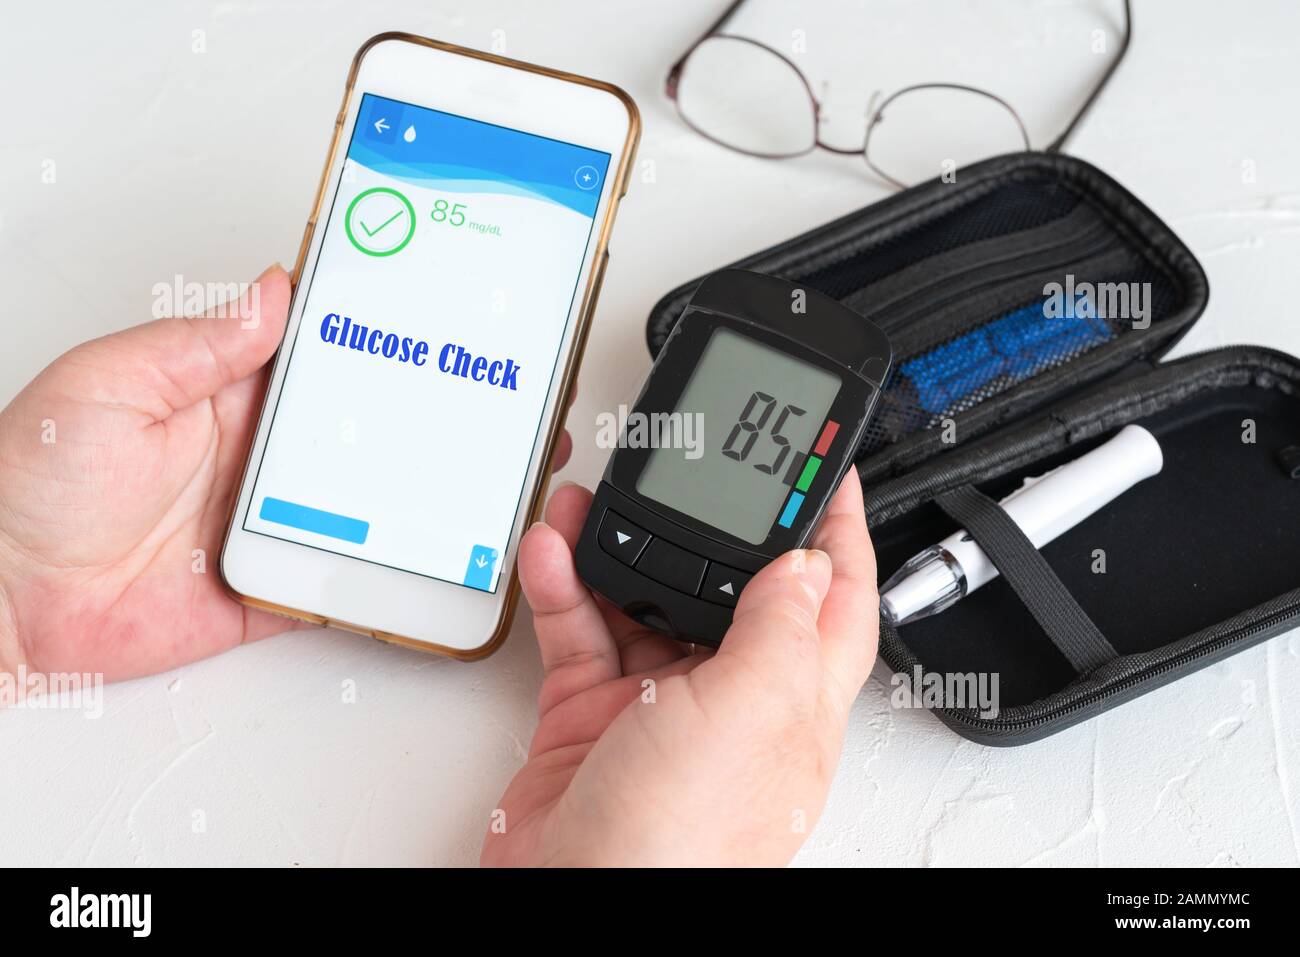 Measuring glucose levels and using smart phone. Healthcare and medical concept Stock Photo